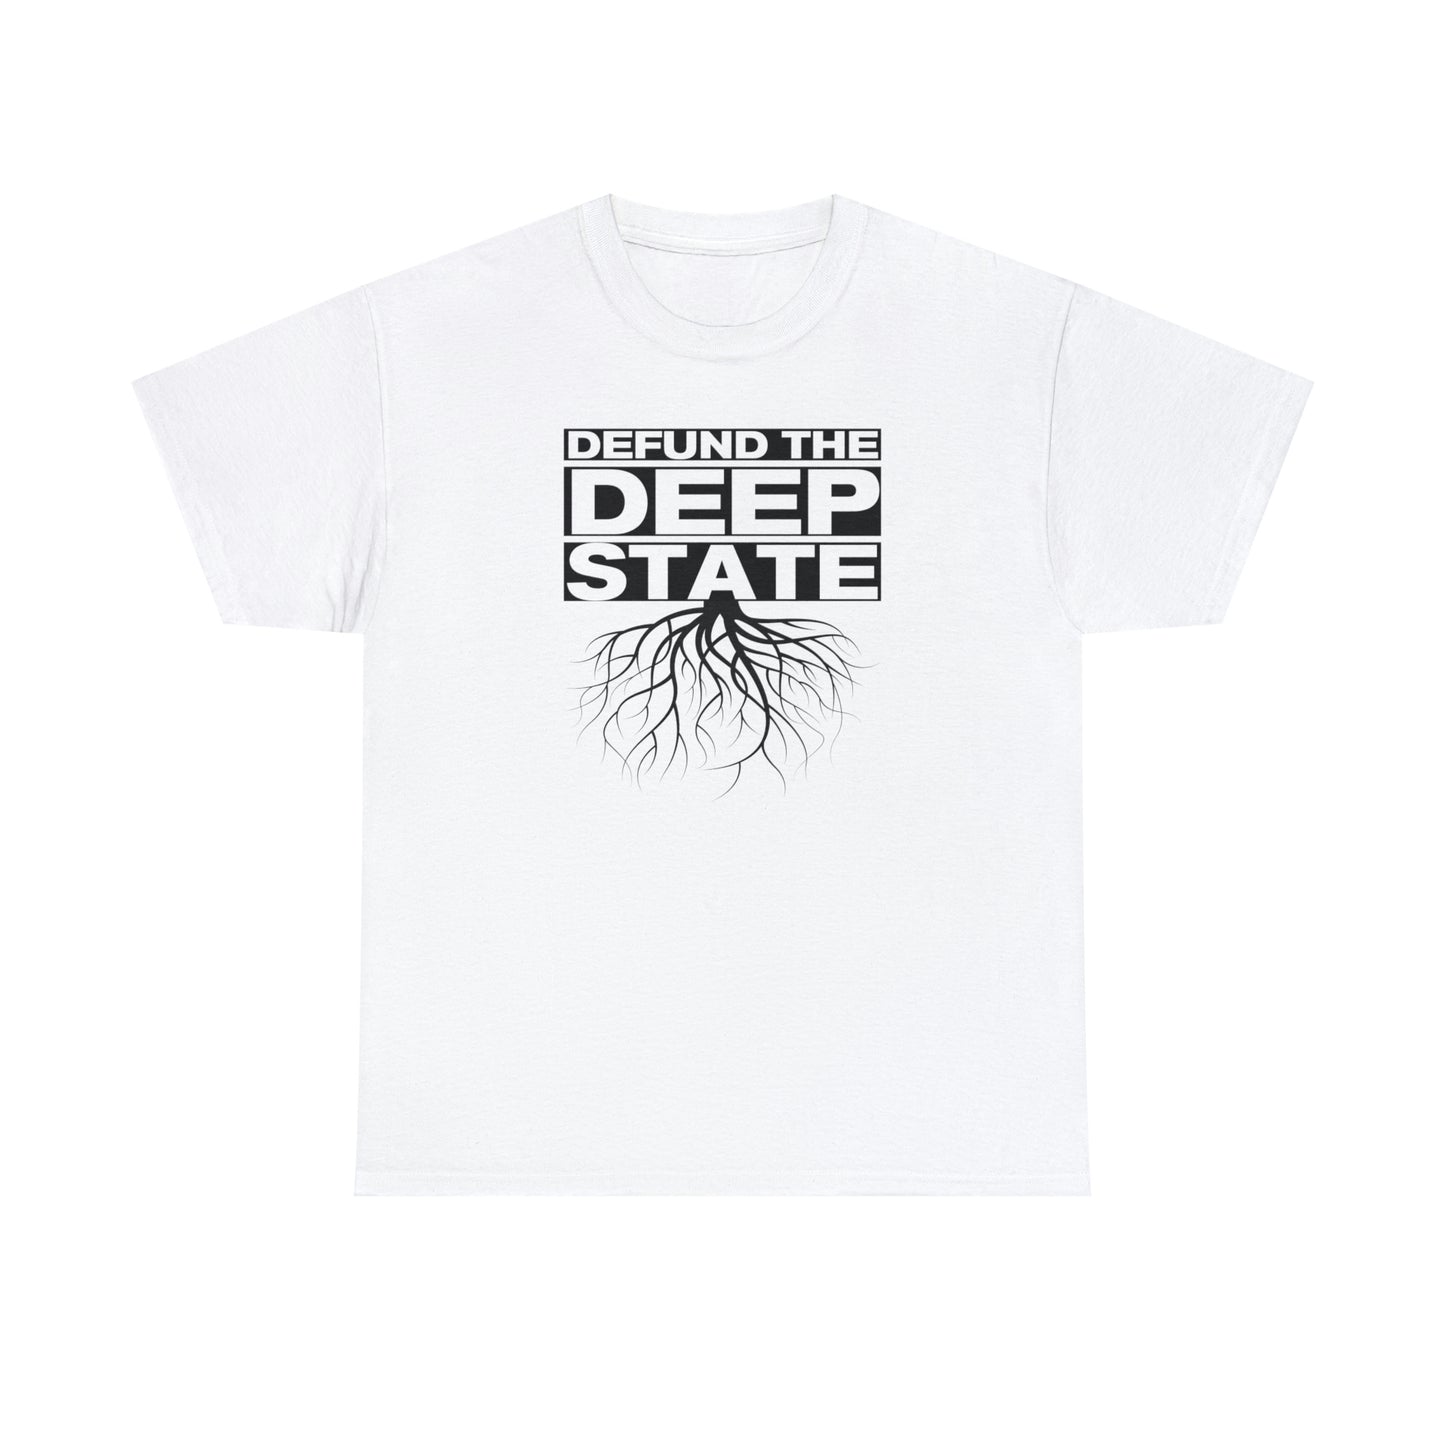 Defund The Deep State T-Shirt Political TShirt For Conservative Shirt MAGA Shirt For Conservative Gift Drain The Swamp Shirt Conspiracy Tee